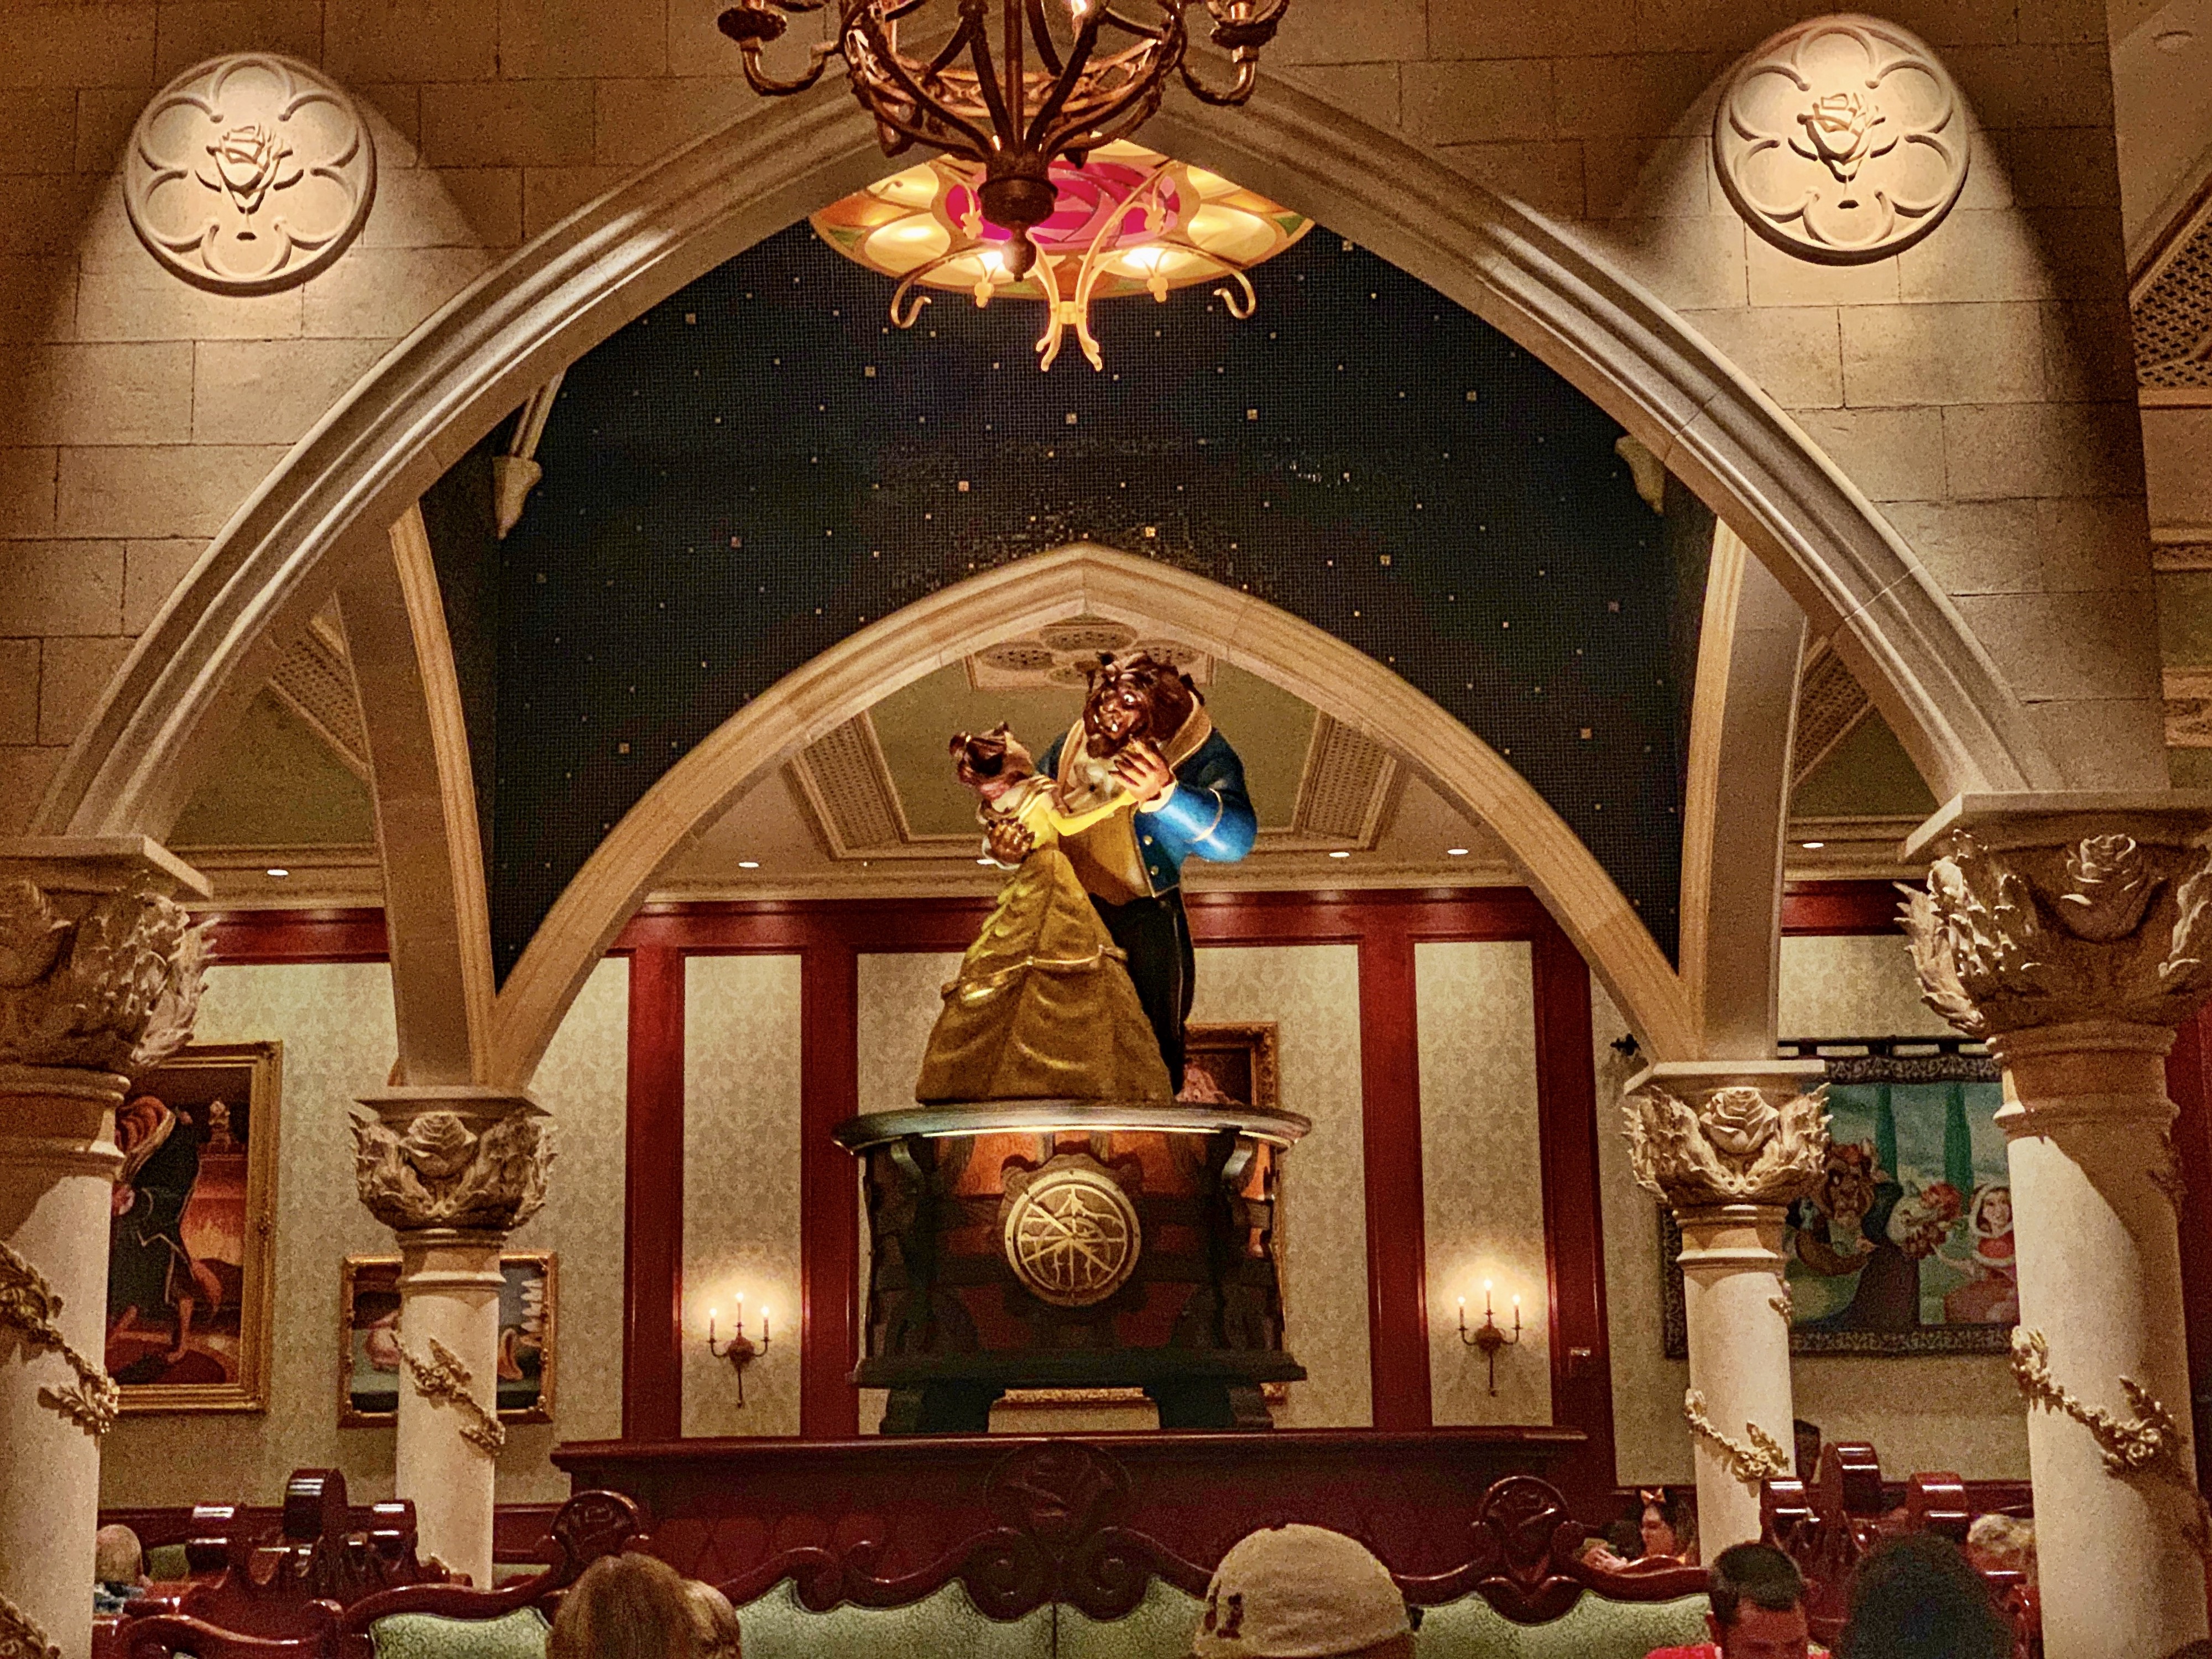 Dine in Elegance at the Be Our Guest Restaurant in Disney World